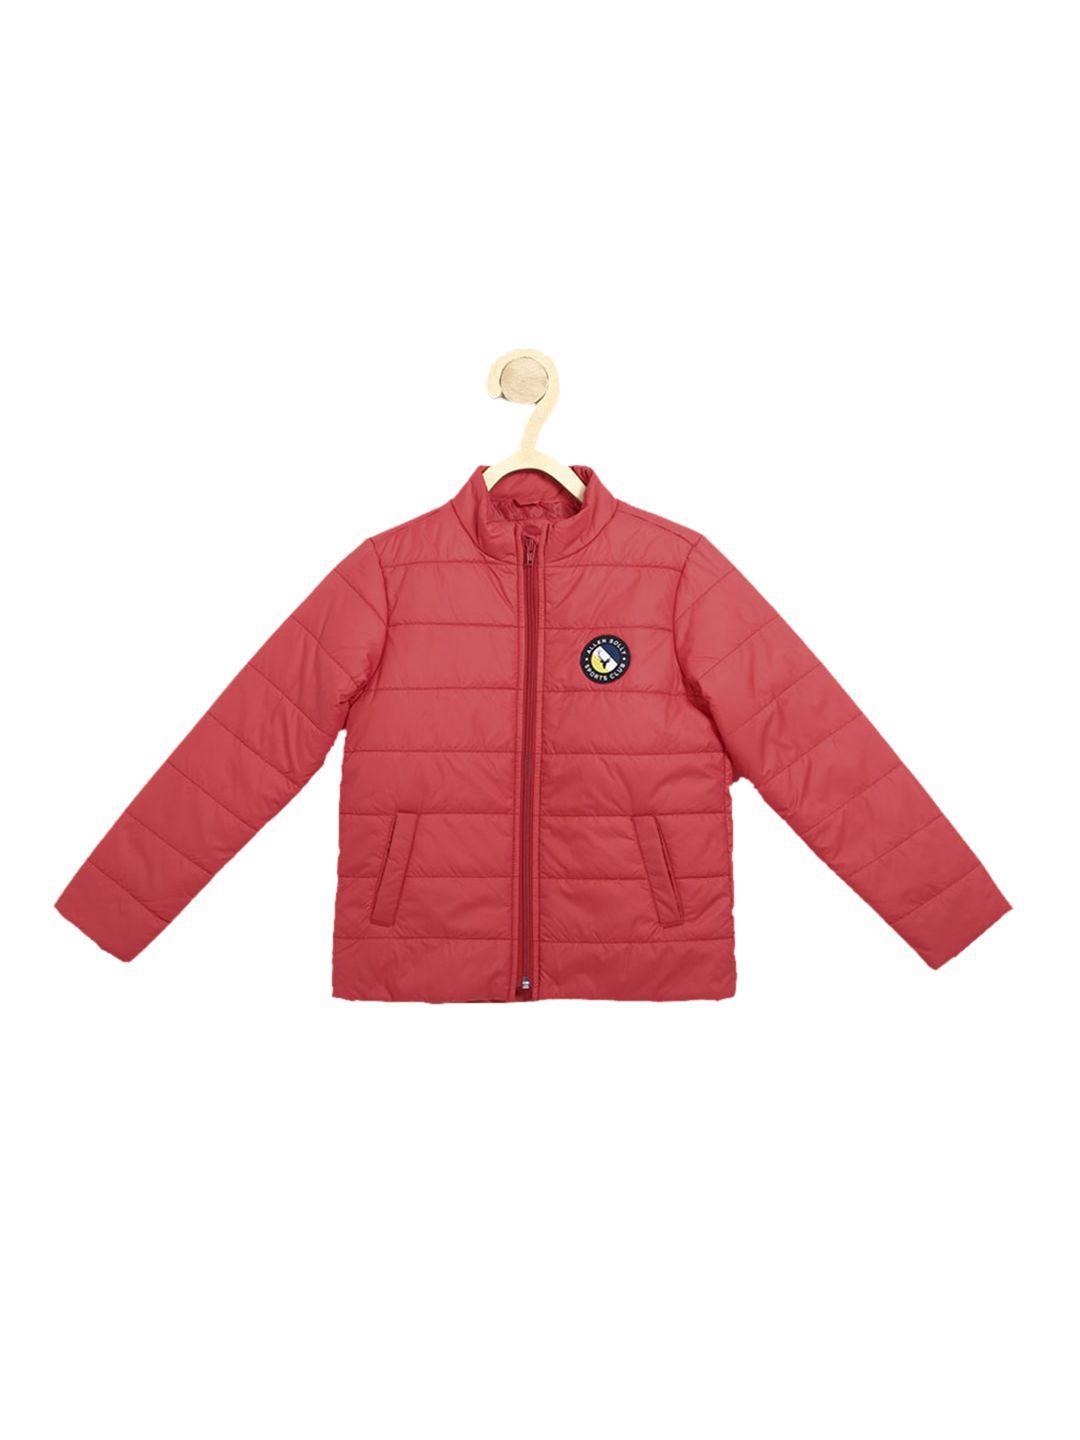 Allen Solly Junior Boys Red Puffer Jacket with Patchwork